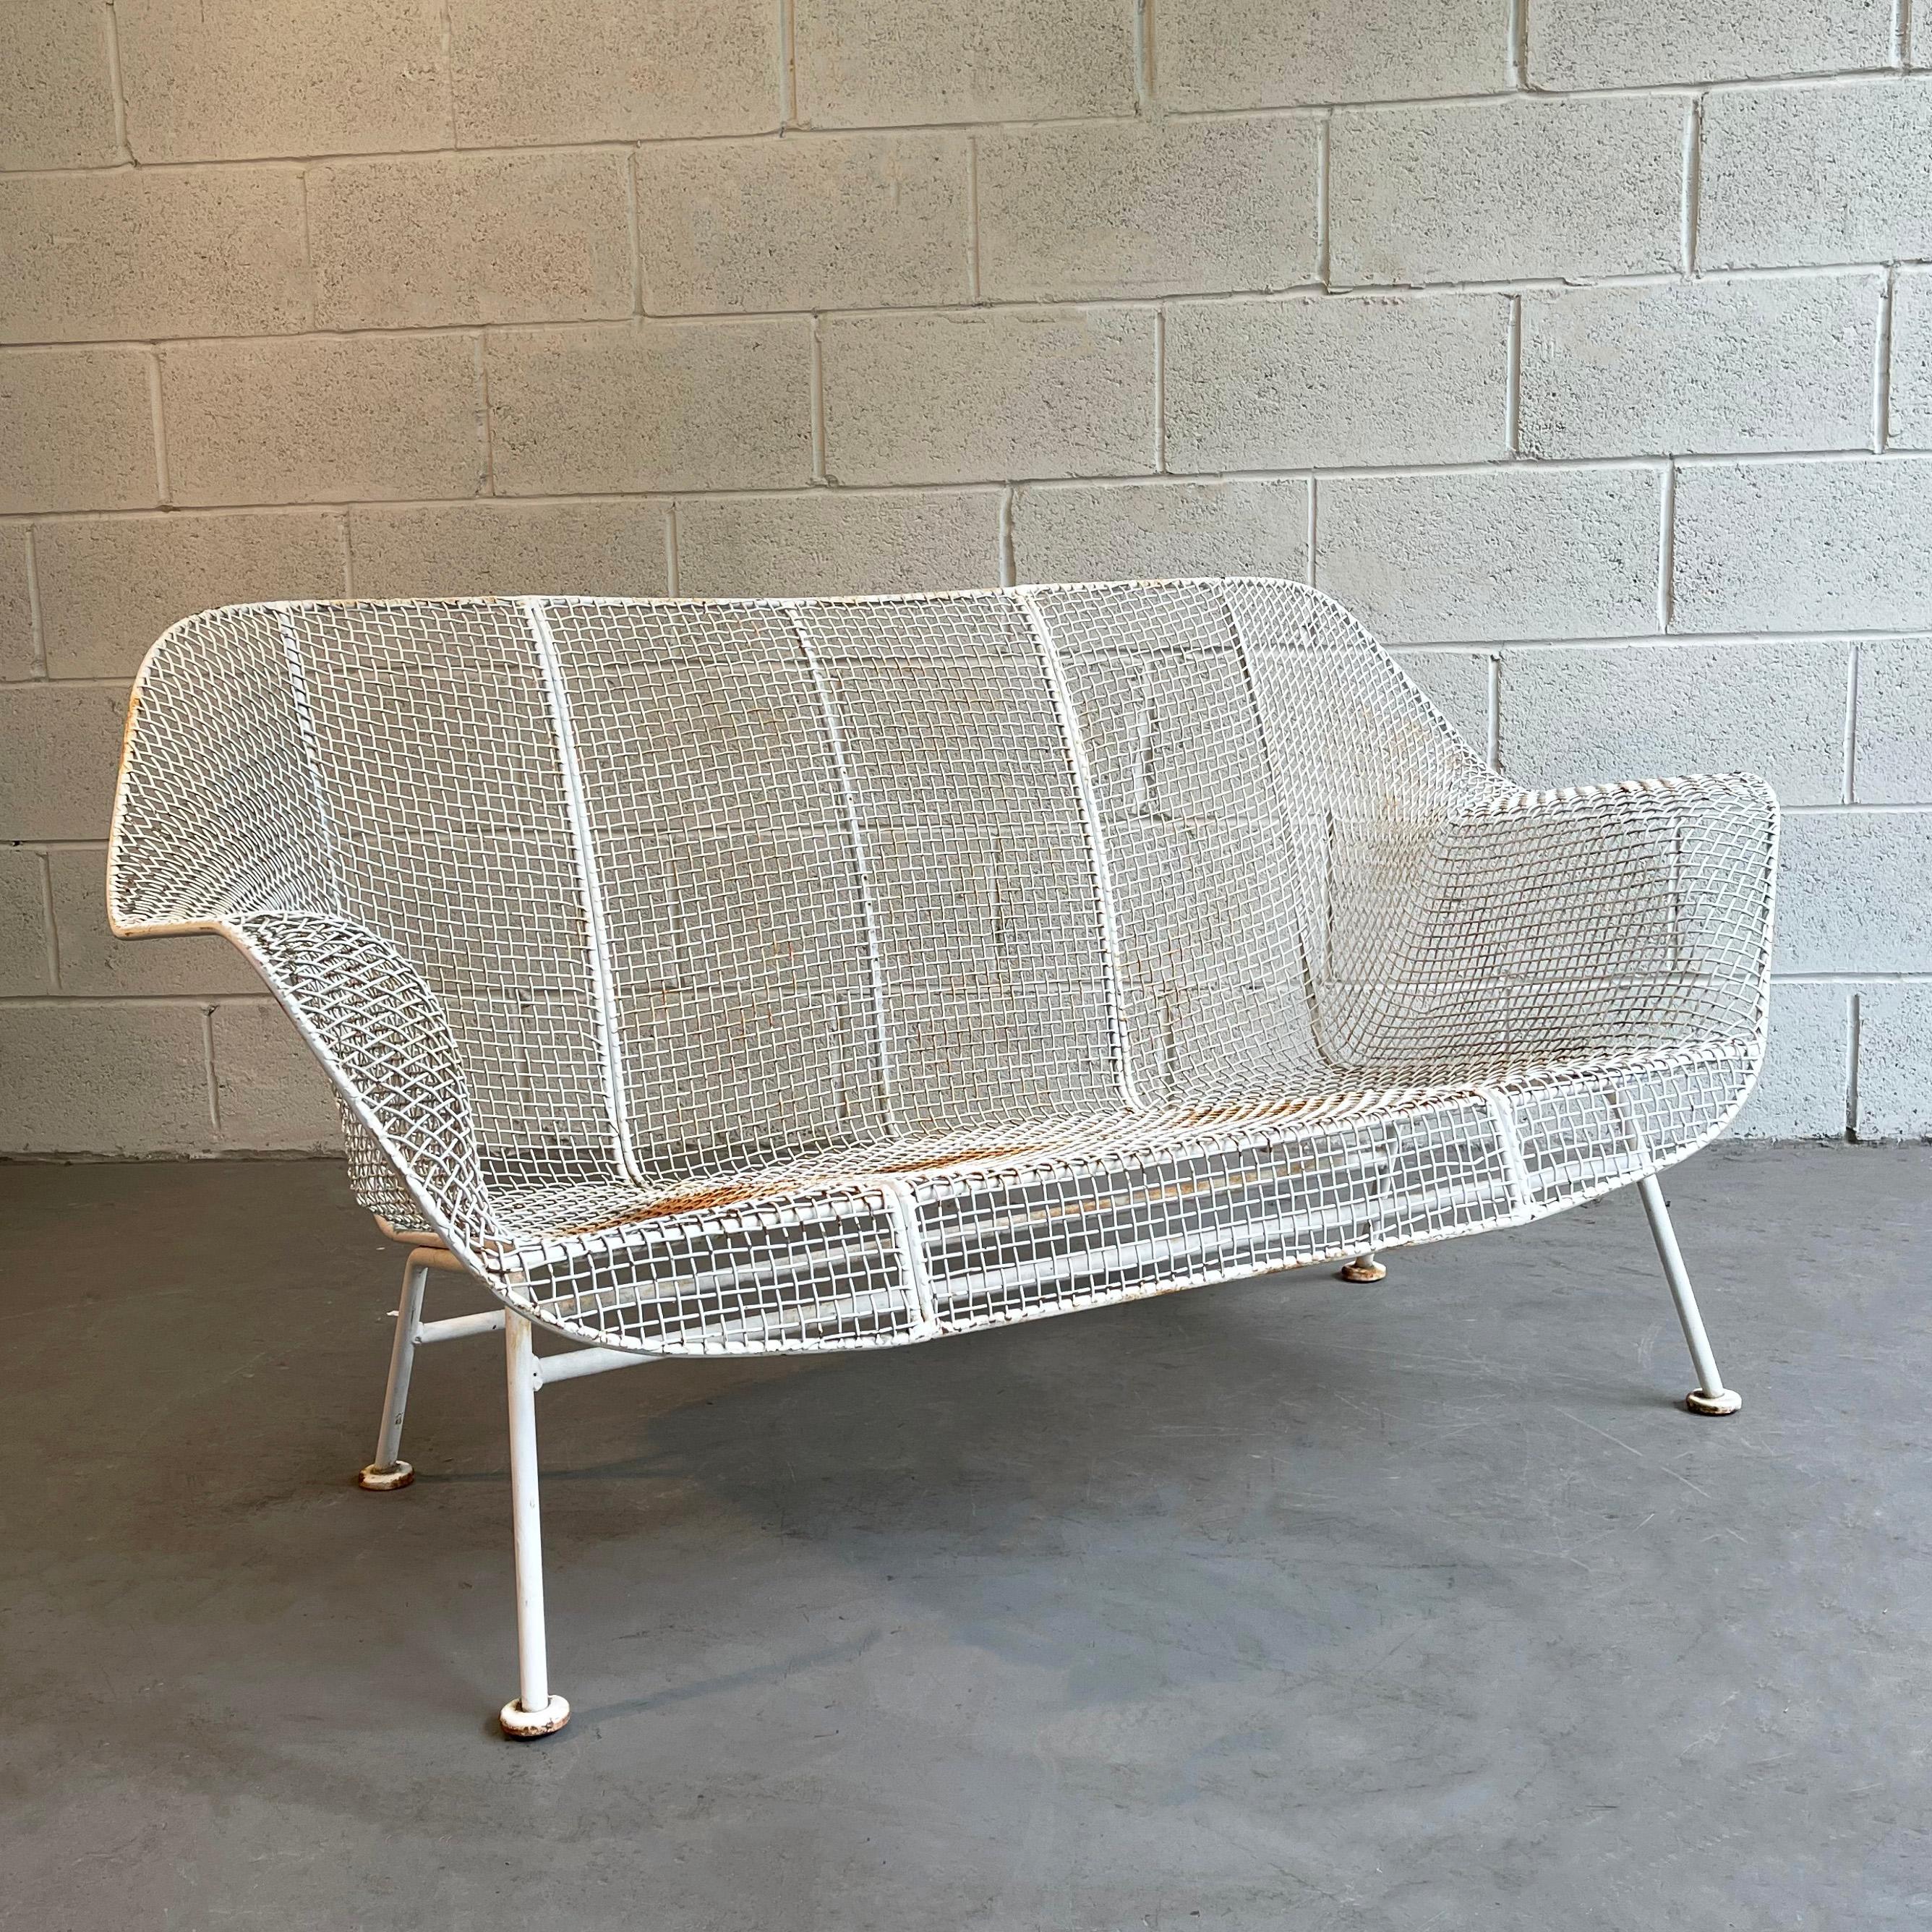 Mid-Century Modern, outdoor, patio, powder-coated, steel mesh and wrought iron loveseat sofa by Russell Woodard, Sculptura.